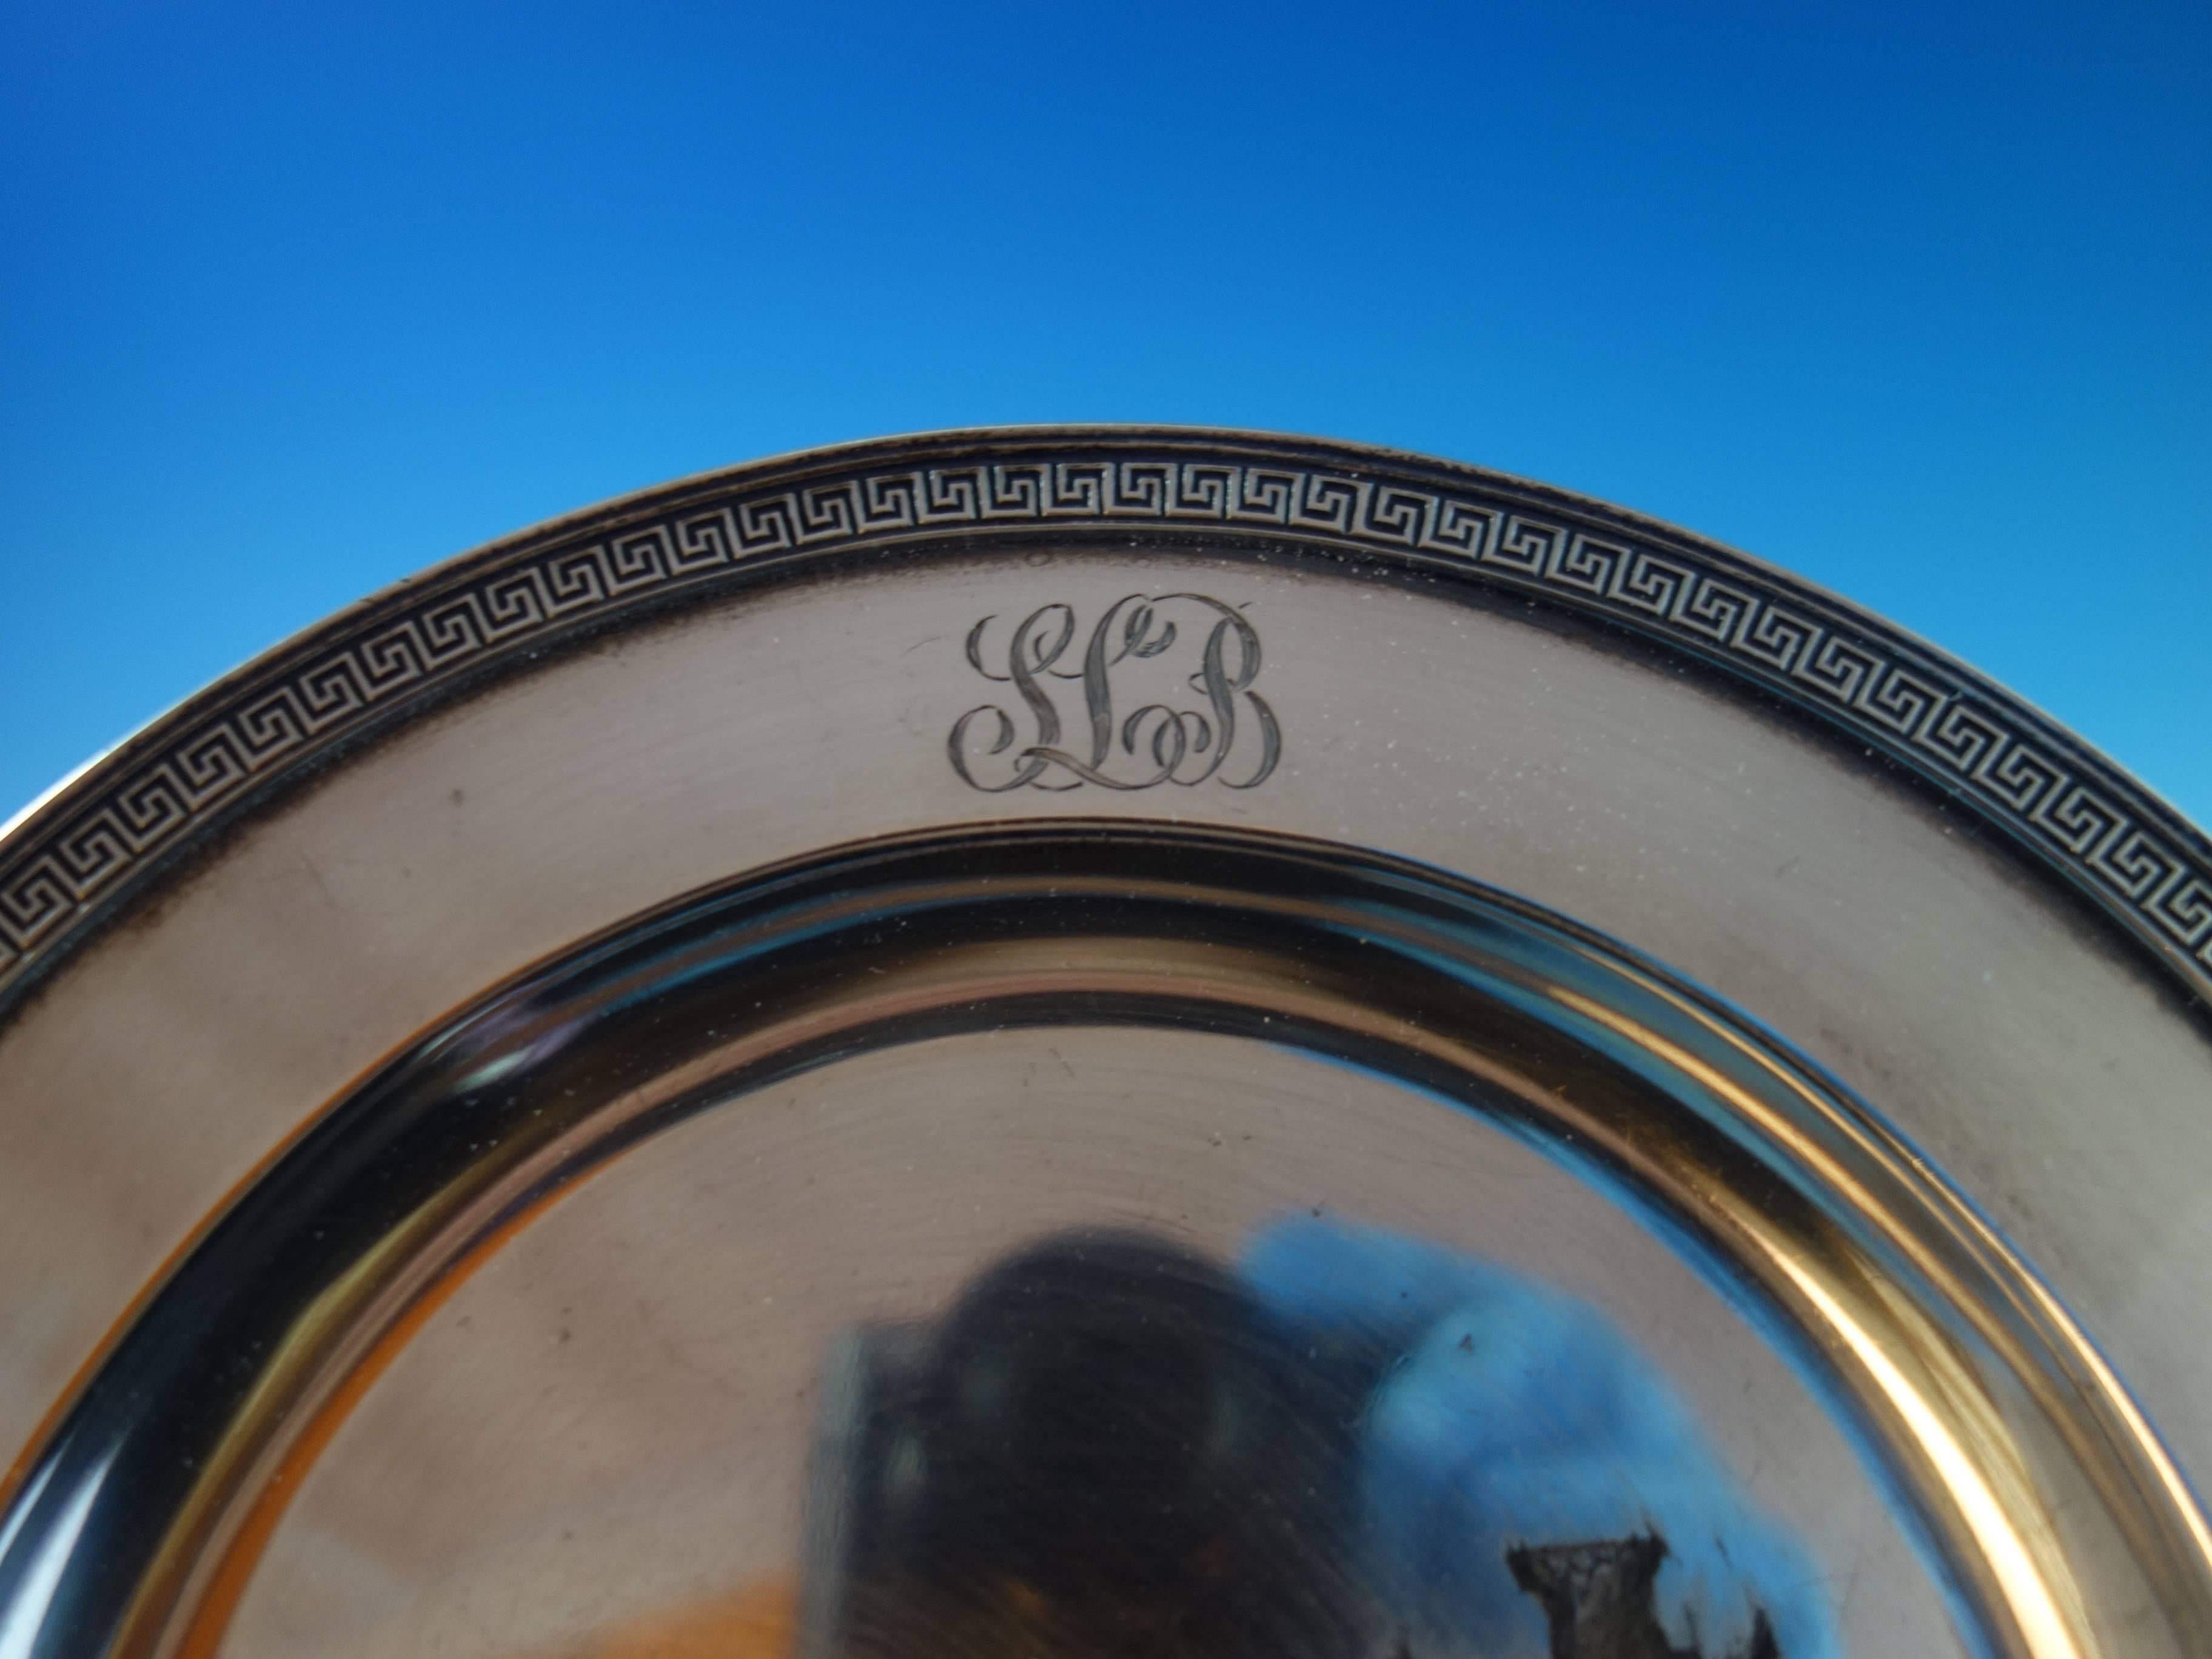 Etruscan by Gorham sterling silver dessert plate. The piece has a "SLB" monogram (see photos), and it's marked with #A9252. The plate measures 7" in diameter, and it weighs 6.58 ozt. It is in excellent condition.

100% Satisfaction